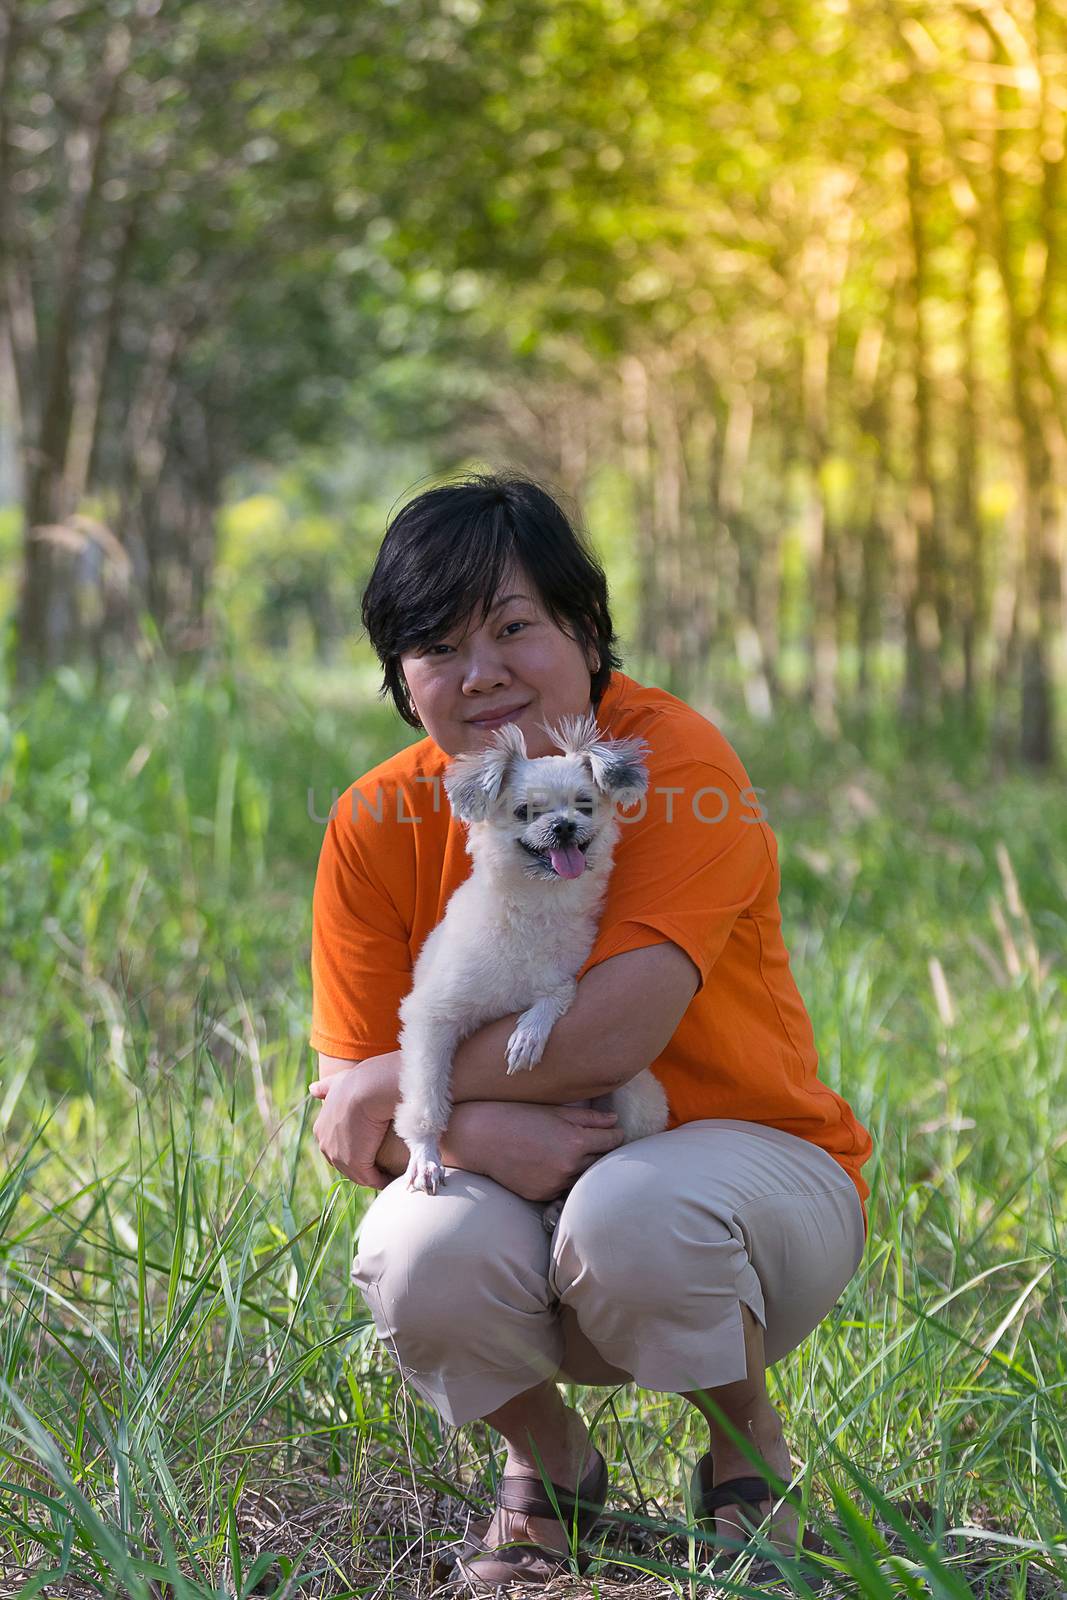 Asia woman plump body and her dog at rubber tree in row at a rubber tree plantation natural latex. , process in soft orange sun light style